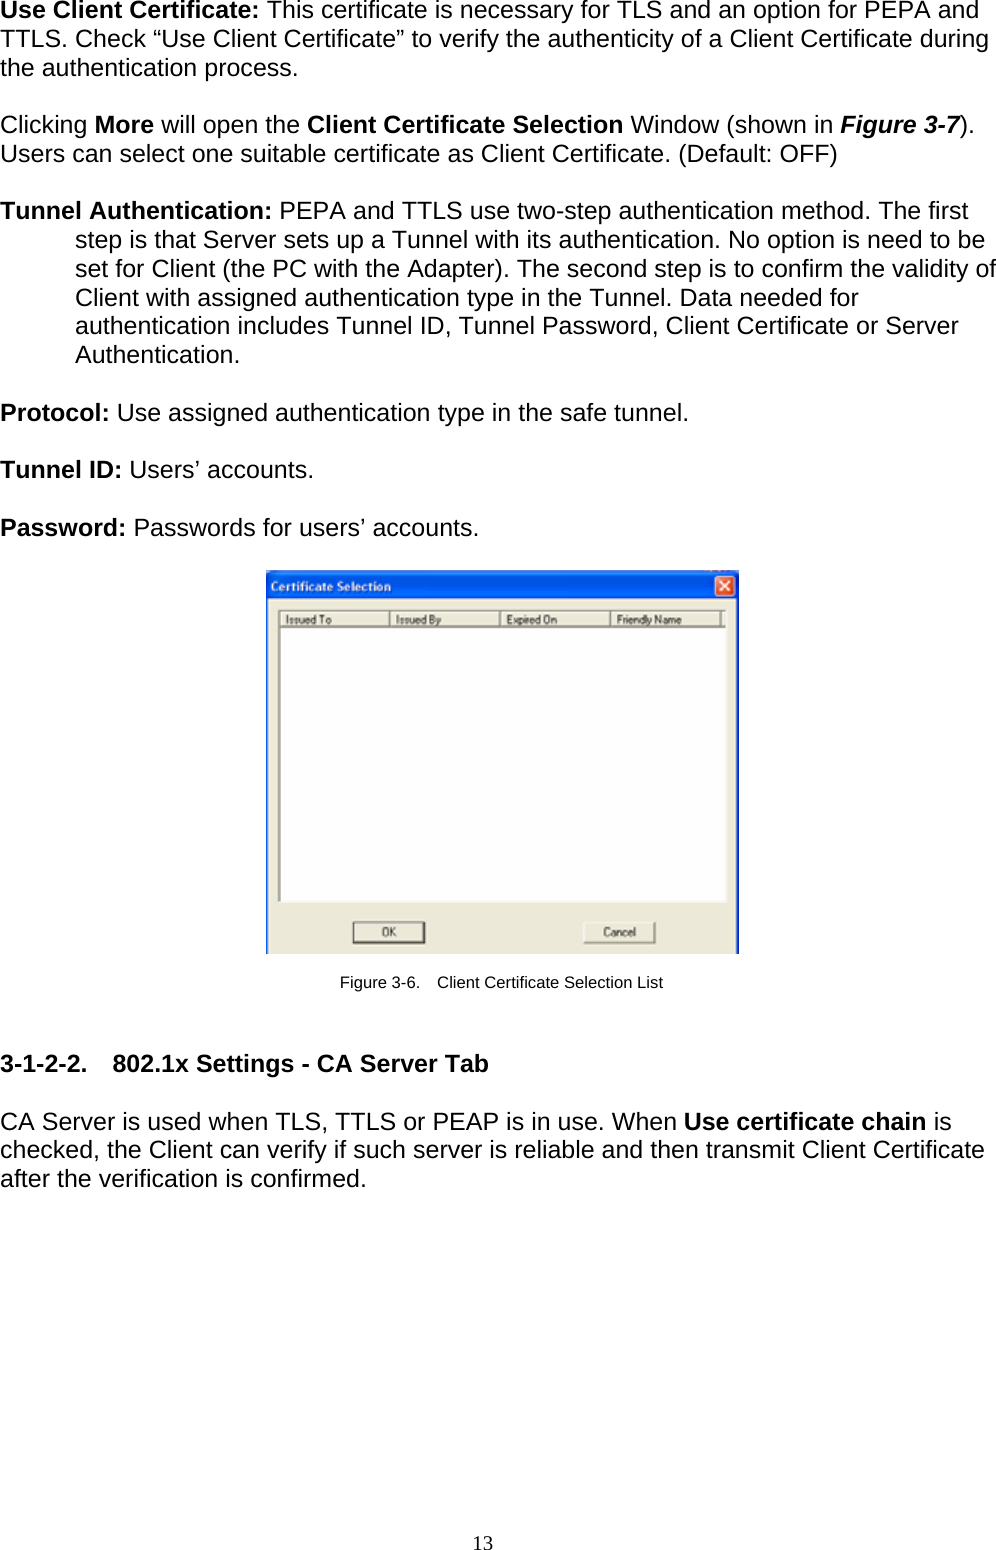 13    Use Client Certificate: This certificate is necessary for TLS and an option for PEPA and TTLS. Check “Use Client Certificate” to verify the authenticity of a Client Certificate during the authentication process.    Clicking More will open the Client Certificate Selection Window (shown in Figure 3-7). Users can select one suitable certificate as Client Certificate. (Default: OFF)  Tunnel Authentication: PEPA and TTLS use two-step authentication method. The first step is that Server sets up a Tunnel with its authentication. No option is need to be set for Client (the PC with the Adapter). The second step is to confirm the validity of Client with assigned authentication type in the Tunnel. Data needed for authentication includes Tunnel ID, Tunnel Password, Client Certificate or Server Authentication.  Protocol: Use assigned authentication type in the safe tunnel.  Tunnel ID: Users’ accounts.  Password: Passwords for users’ accounts.    Figure 3-6.    Client Certificate Selection List   3-1-2-2. 802.1x Settings - CA Server Tab  CA Server is used when TLS, TTLS or PEAP is in use. When Use certificate chain is checked, the Client can verify if such server is reliable and then transmit Client Certificate after the verification is confirmed.    